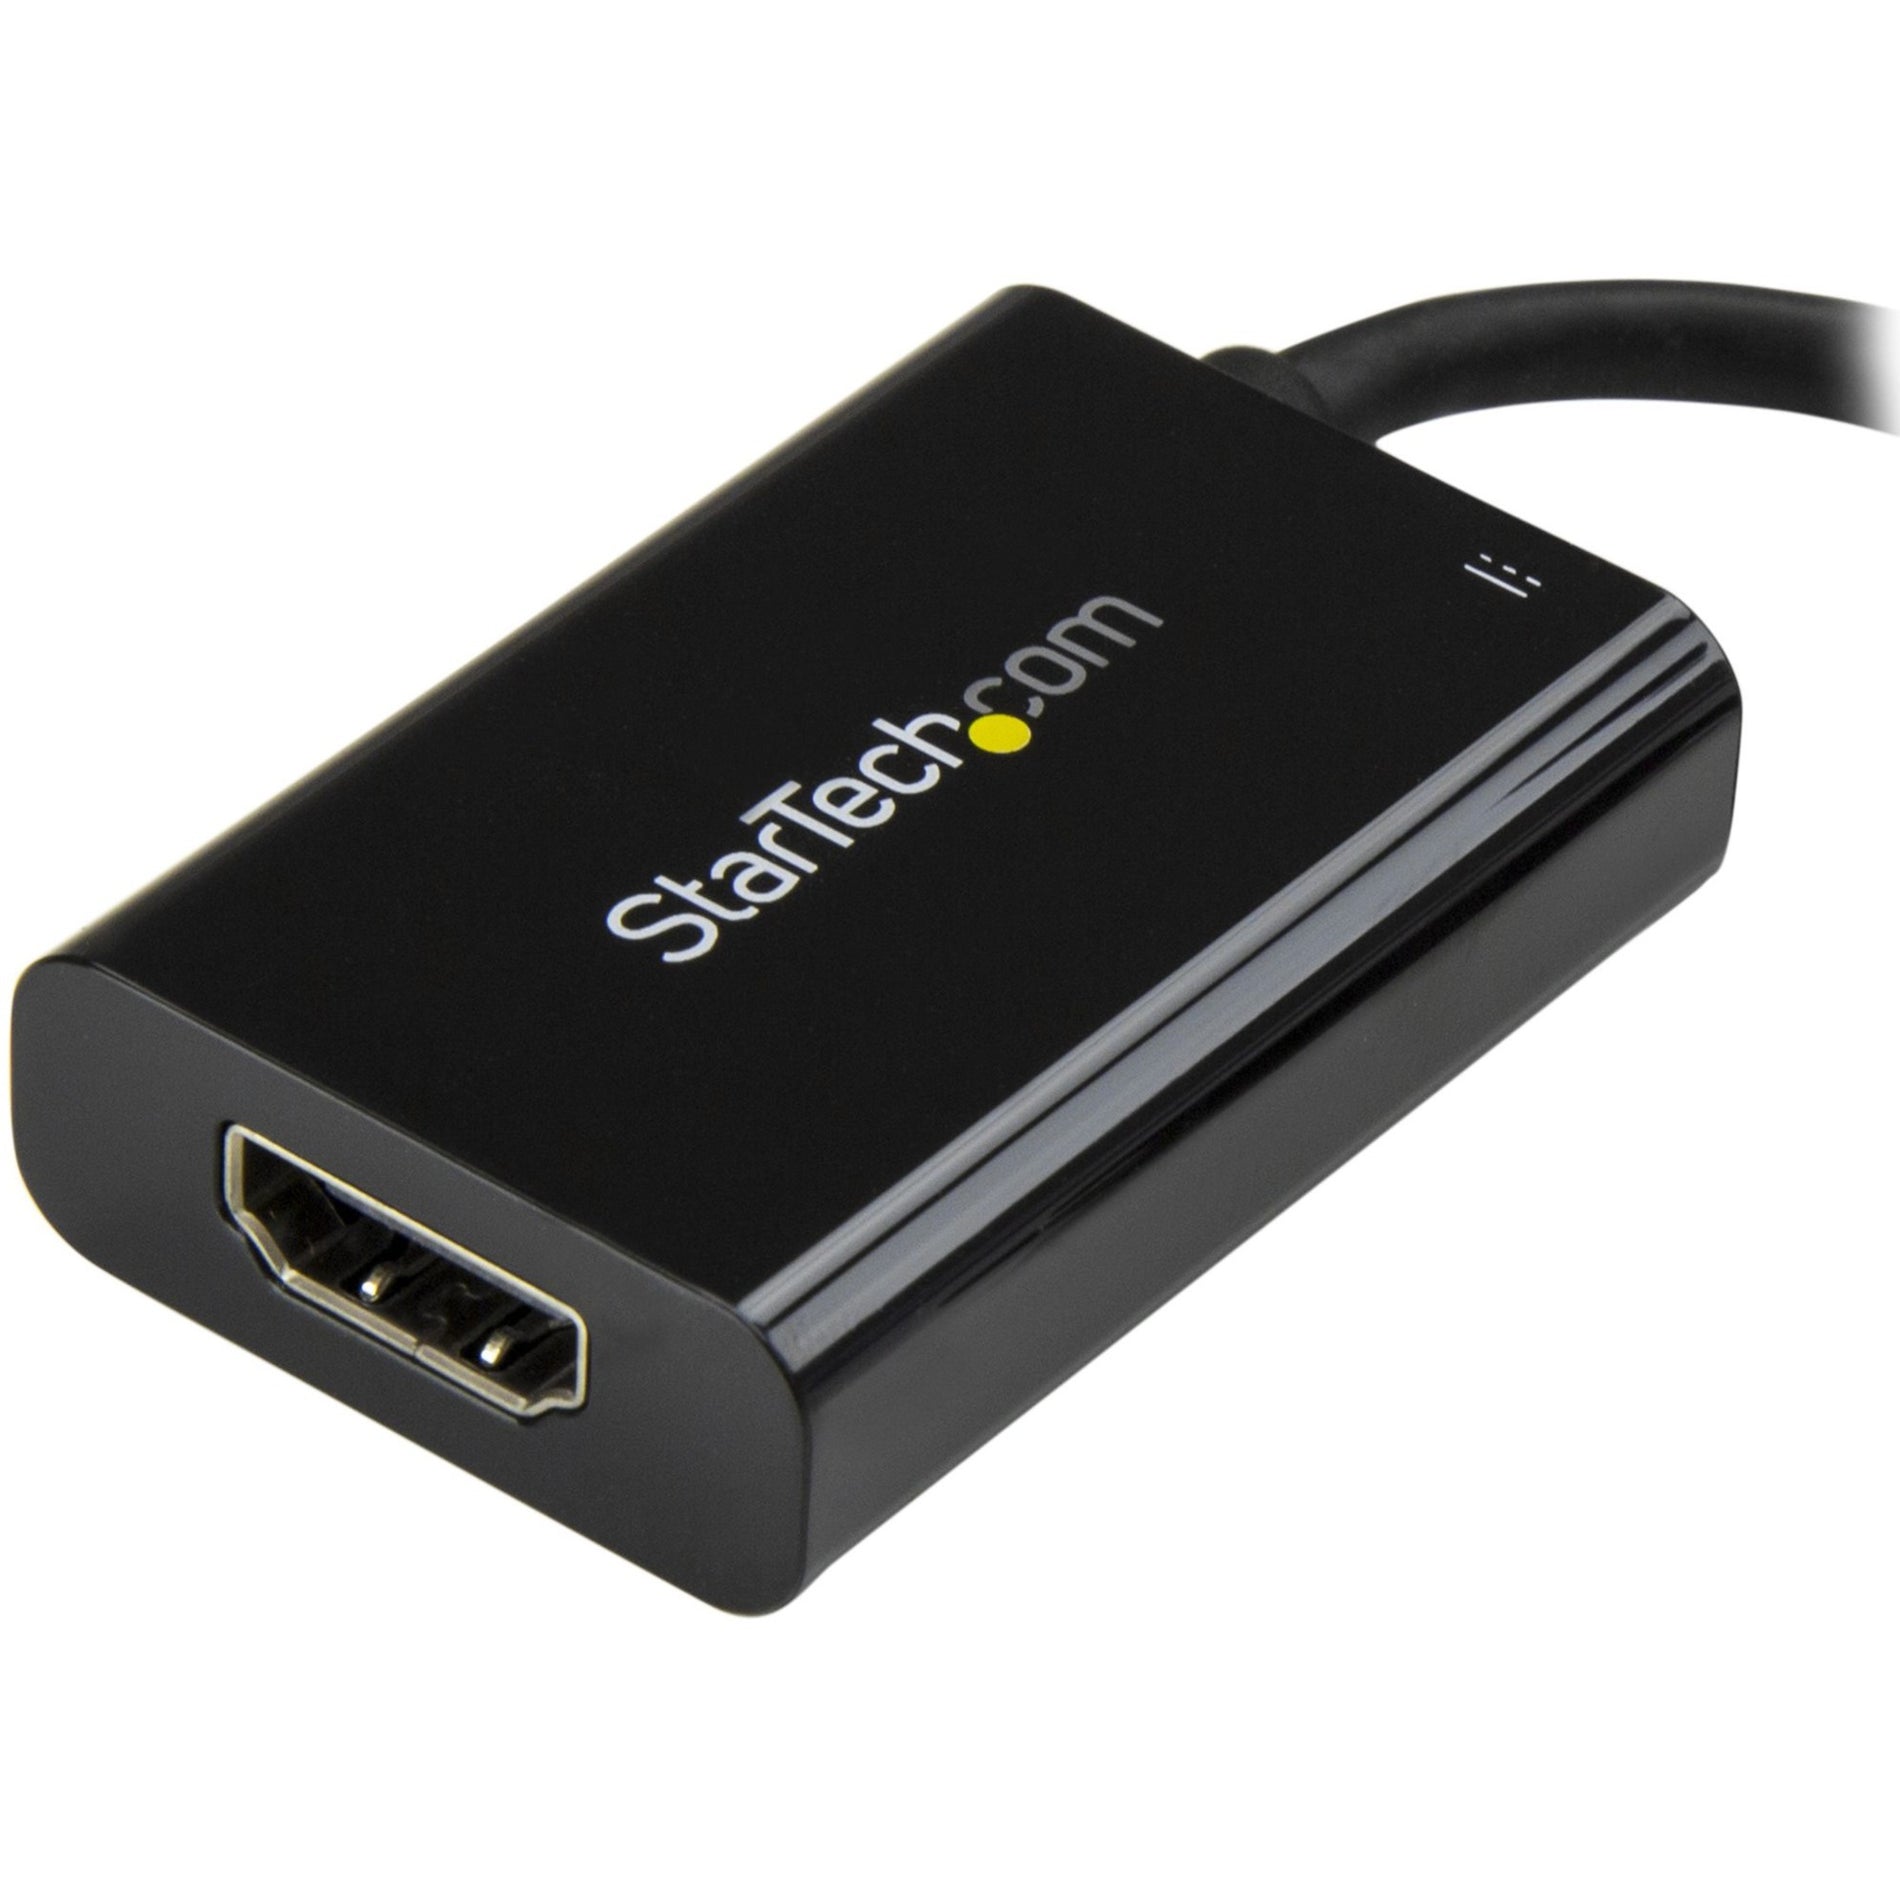 StarTech.com CDP2HDUCP USB-C to HDMI Video Adapter with USB Power Delivery - 4K 60Hz, Plug and Play, HDCP 2.2